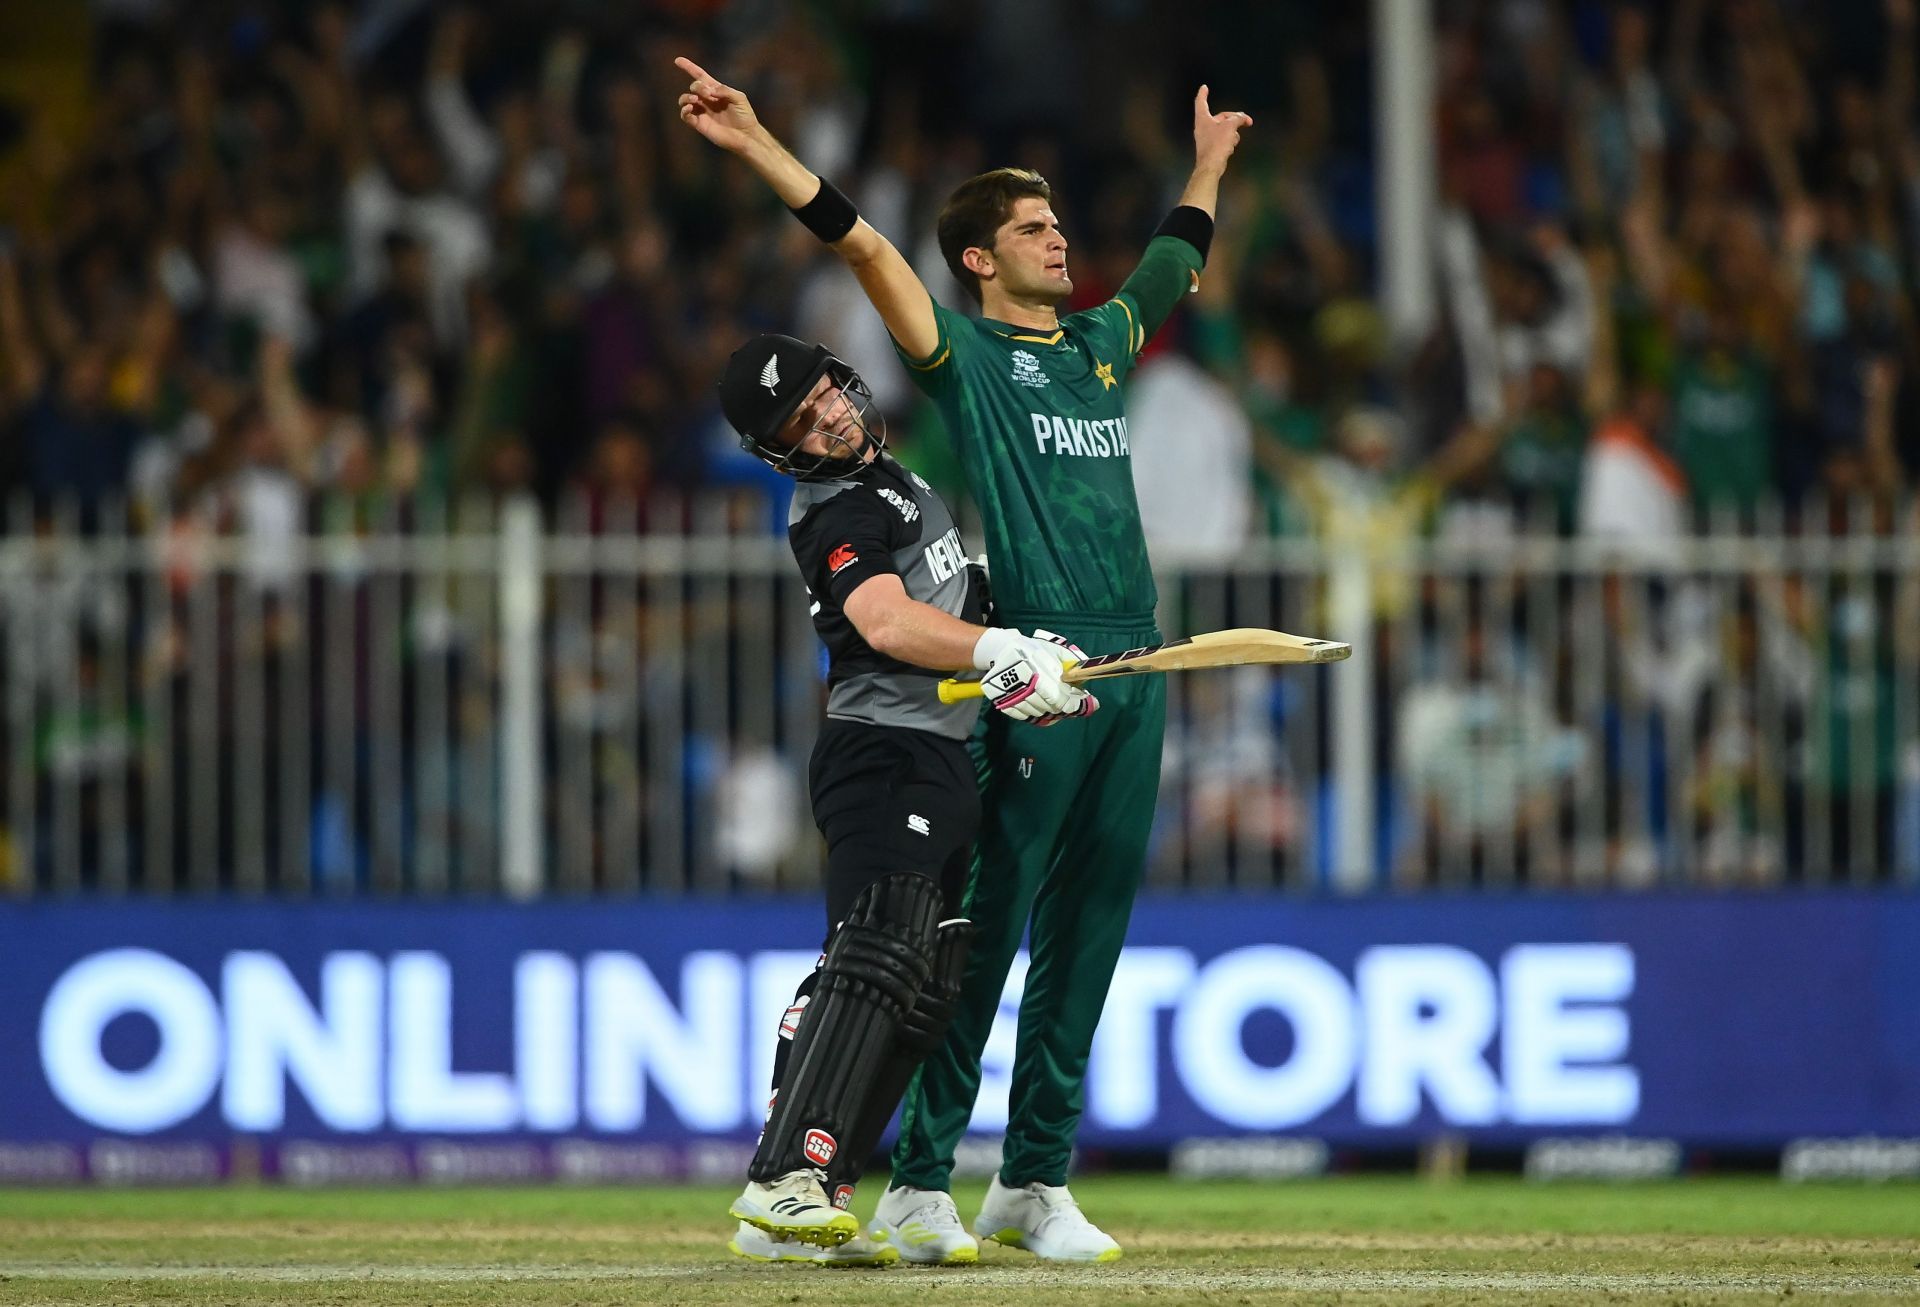 Shaheen Afridi was impressive with the ball during the T20 World Cup 2021.